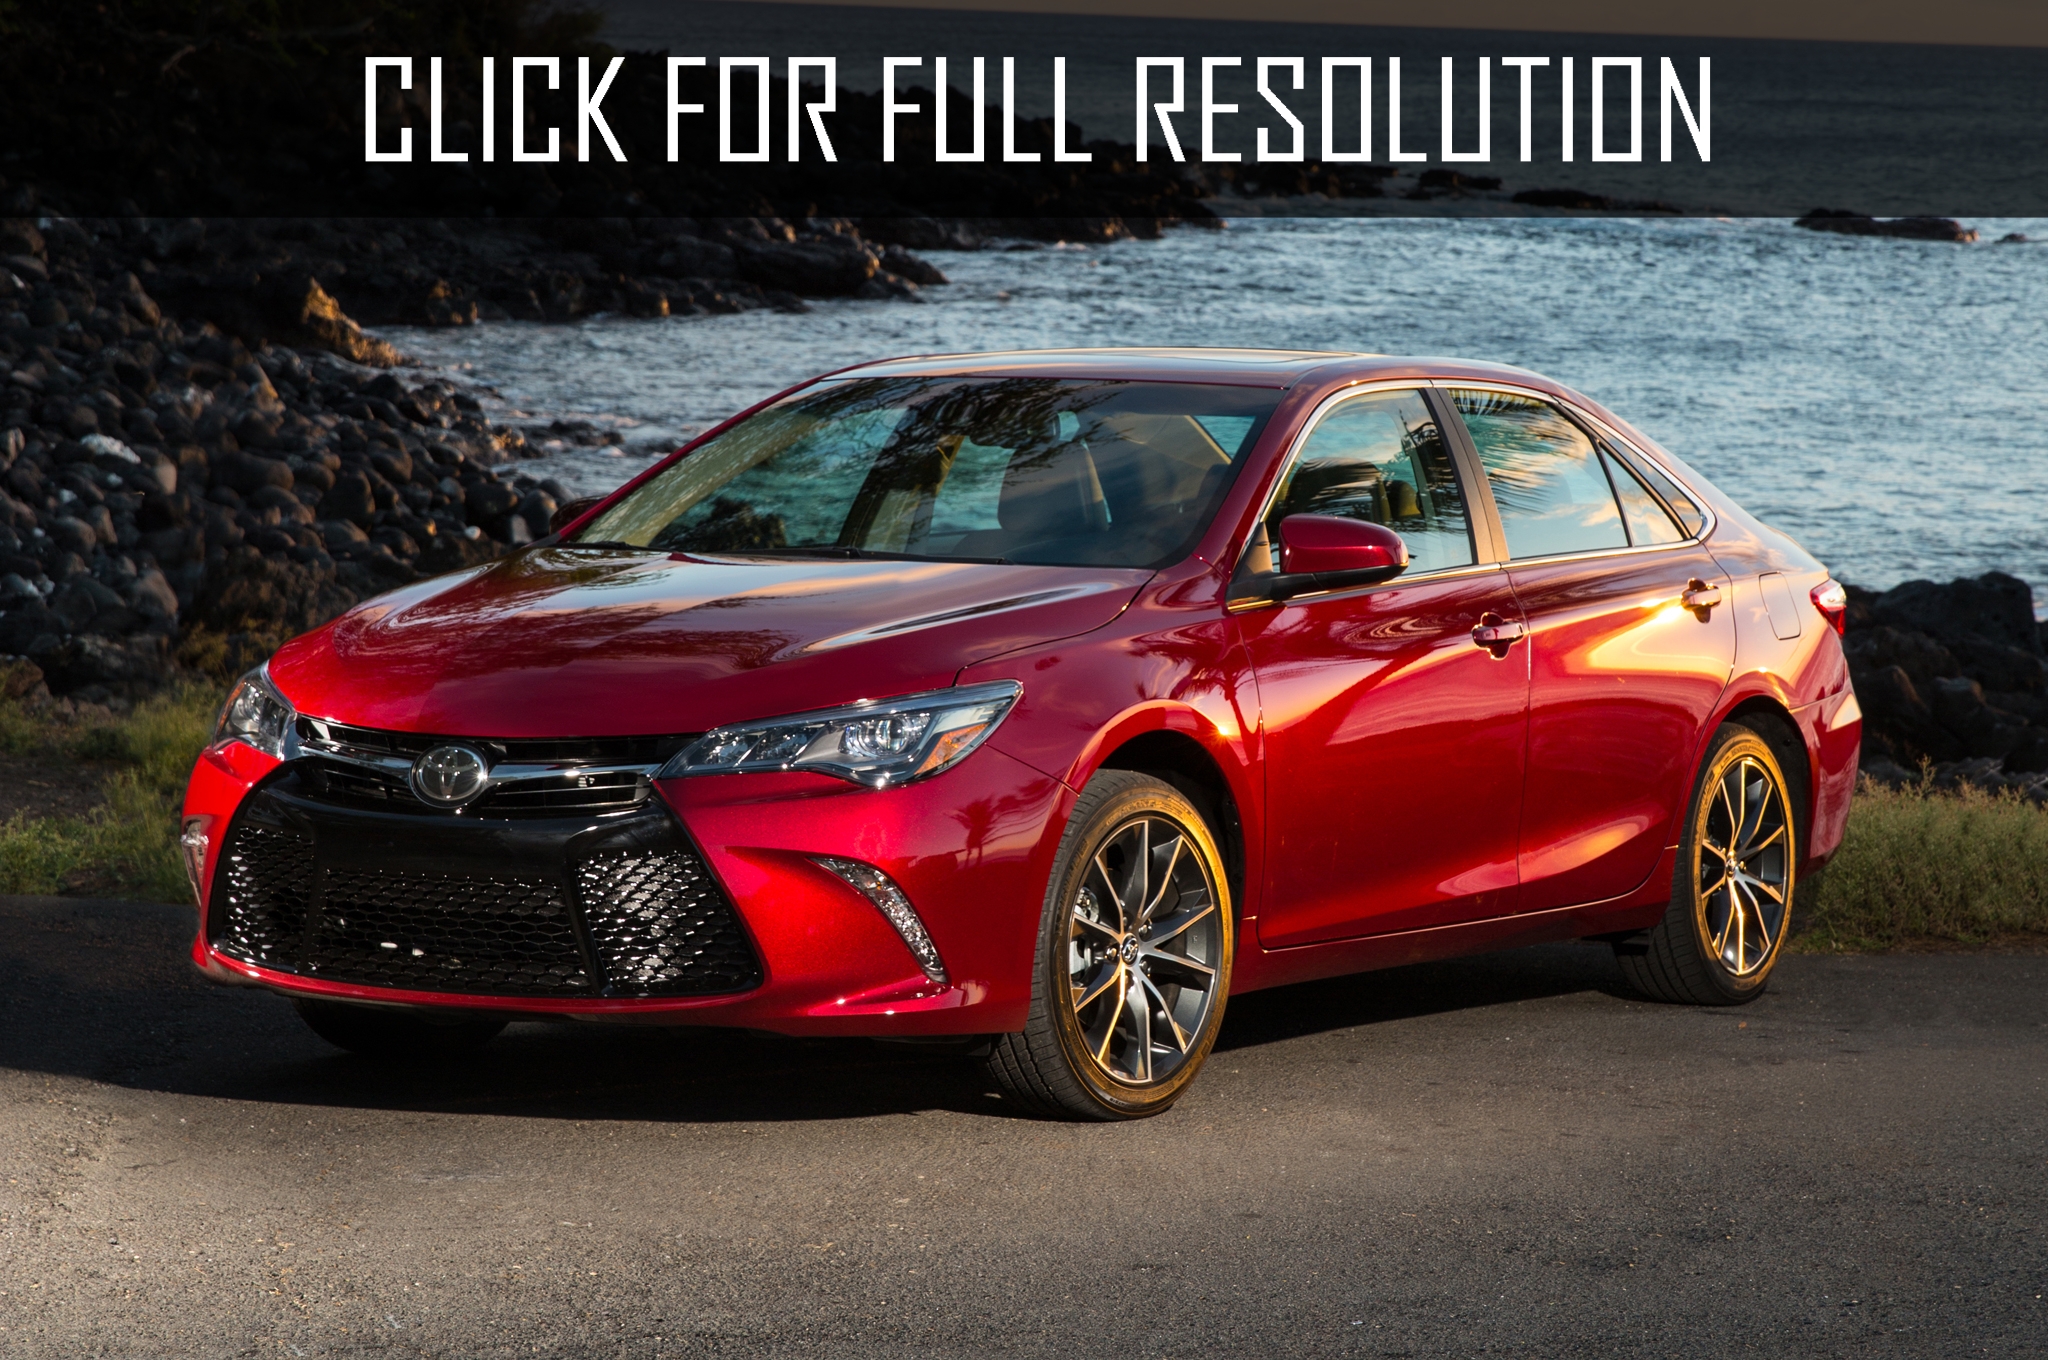 2015 Toyota Camry Xse Best Image Gallery 1 13 Share And